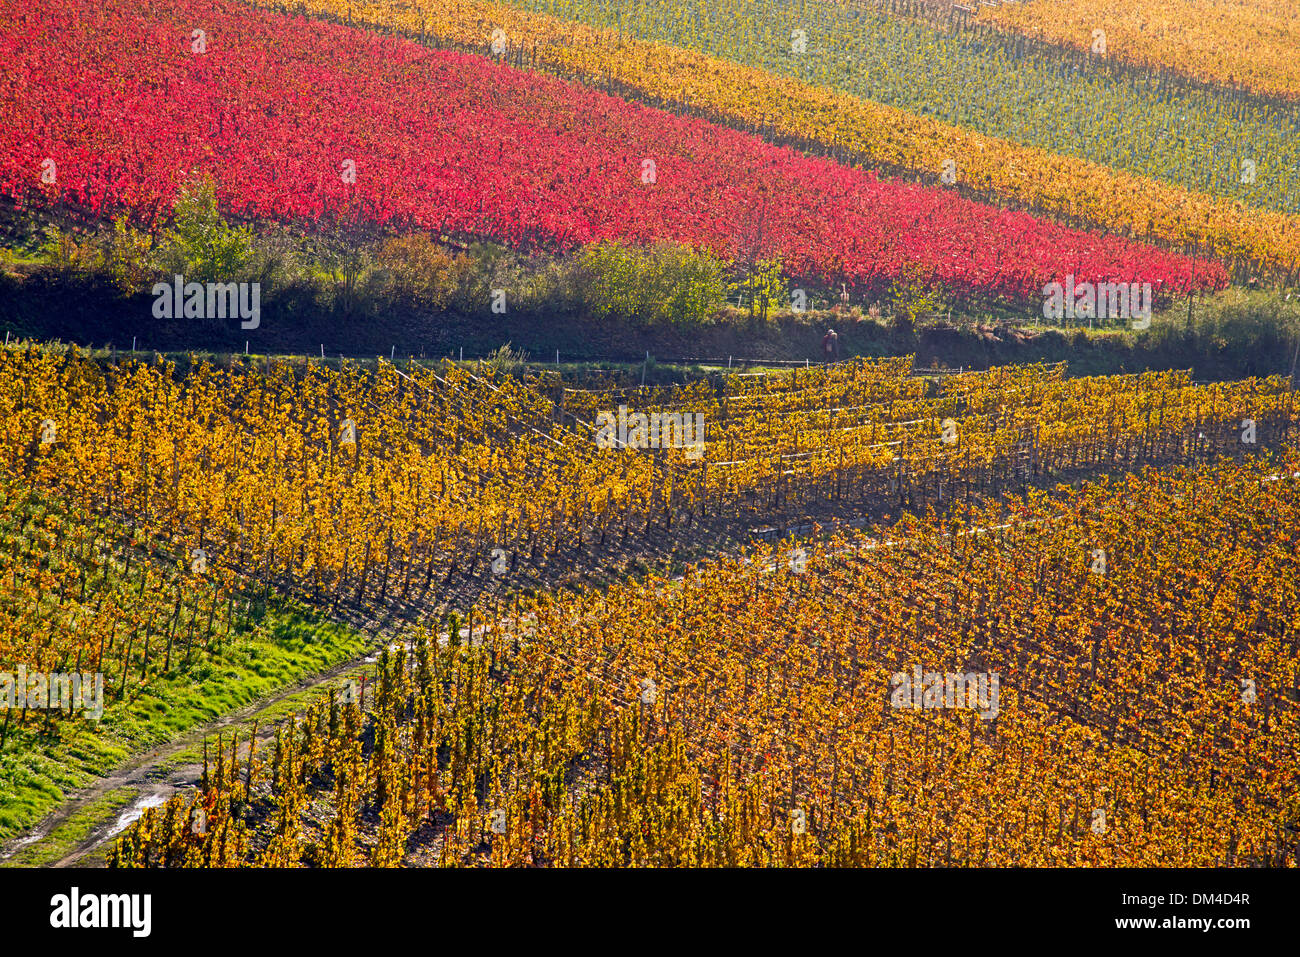 Ahrtal cultivation outhouse surface grow cultivate outside mountain slope Germany Eifel Europe autumn autumn colors autumnal Stock Photo